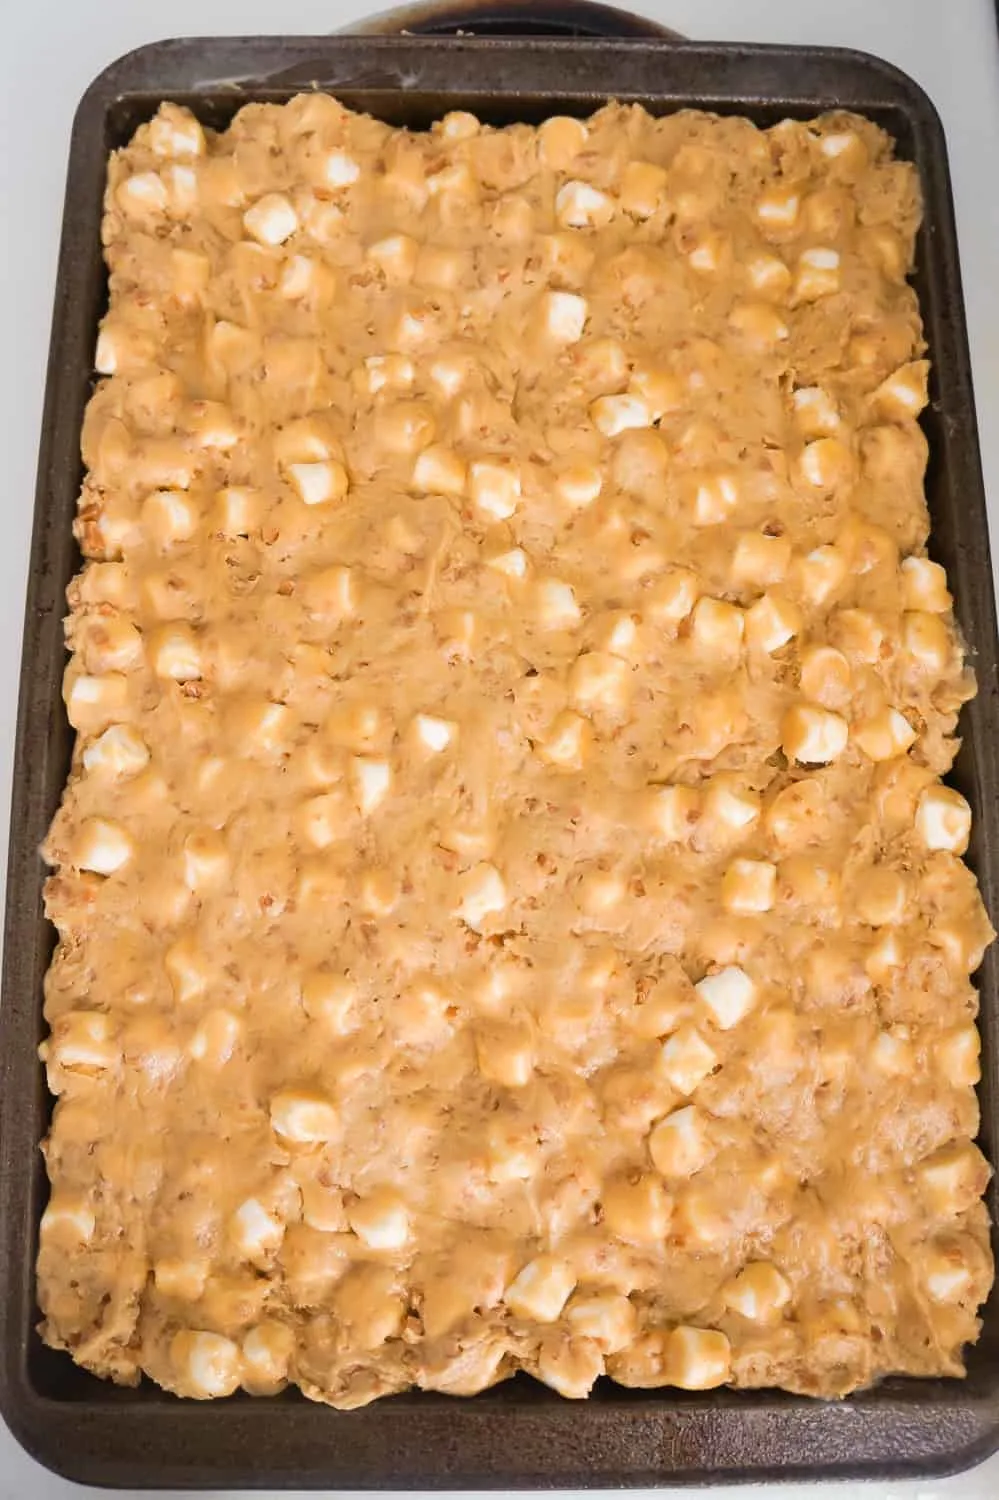 peanut butter marshmallow cookie dough spread out on baking sheet